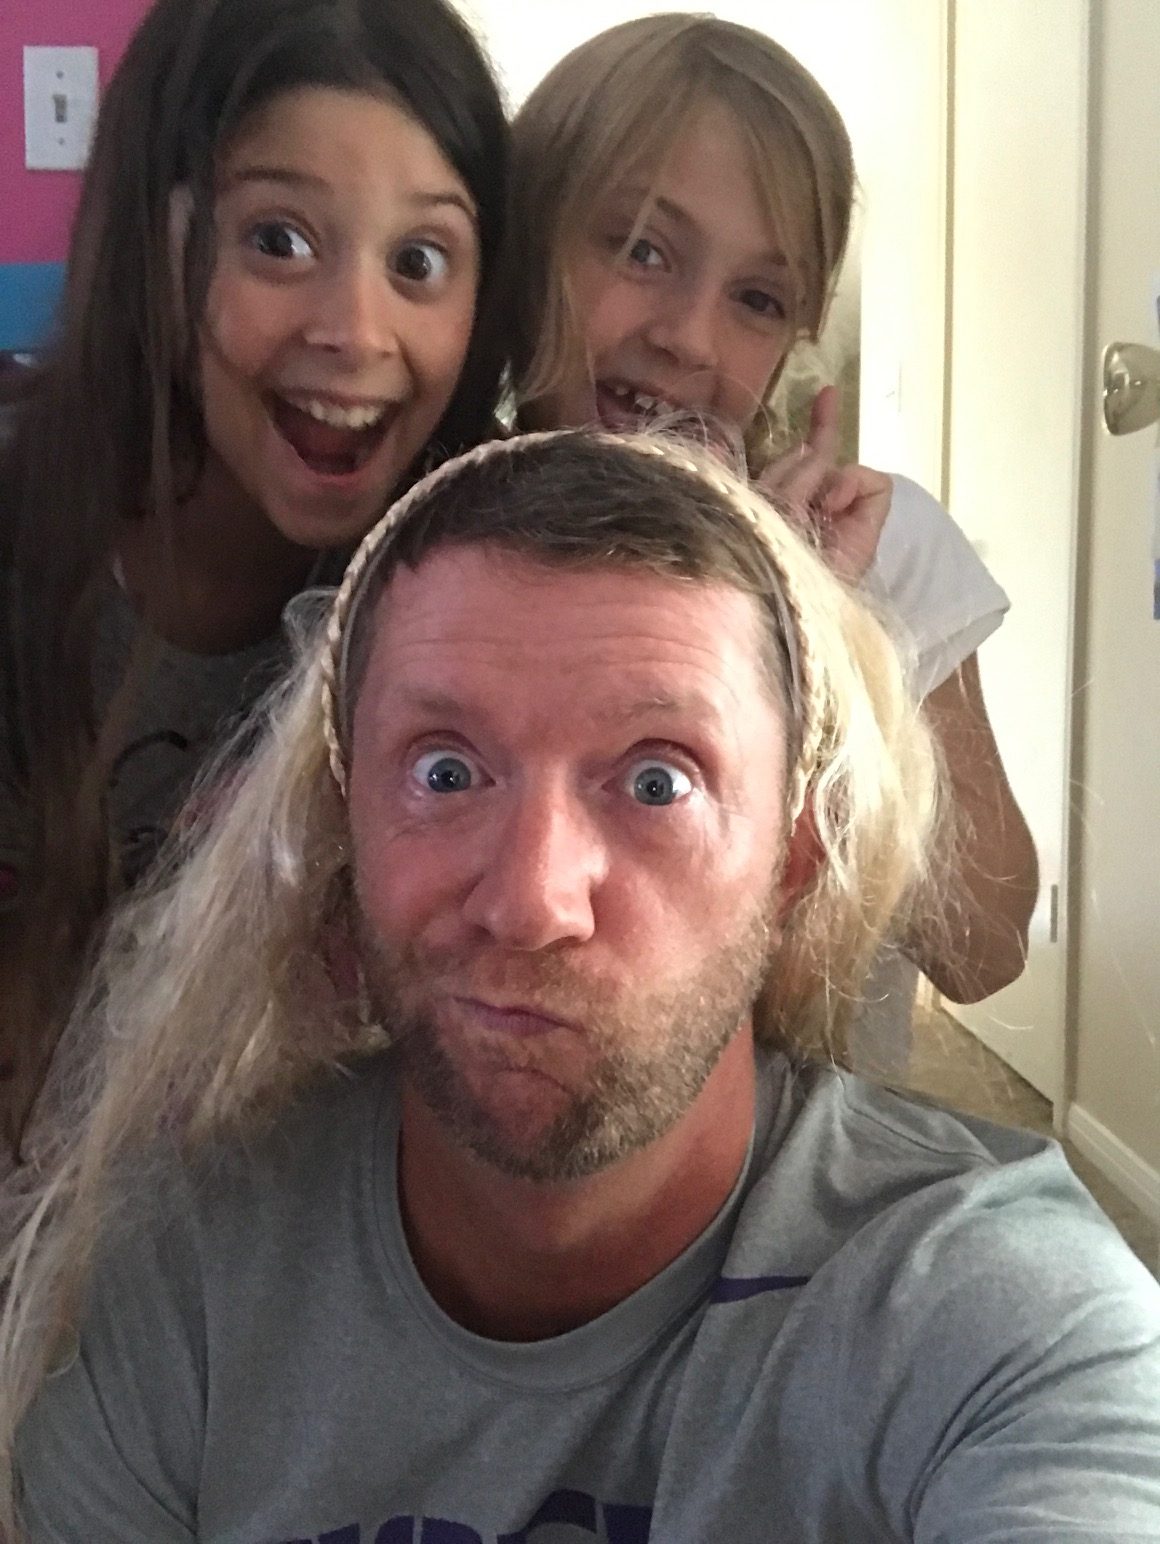 Getting an update on my hair from Anslee and Morgan